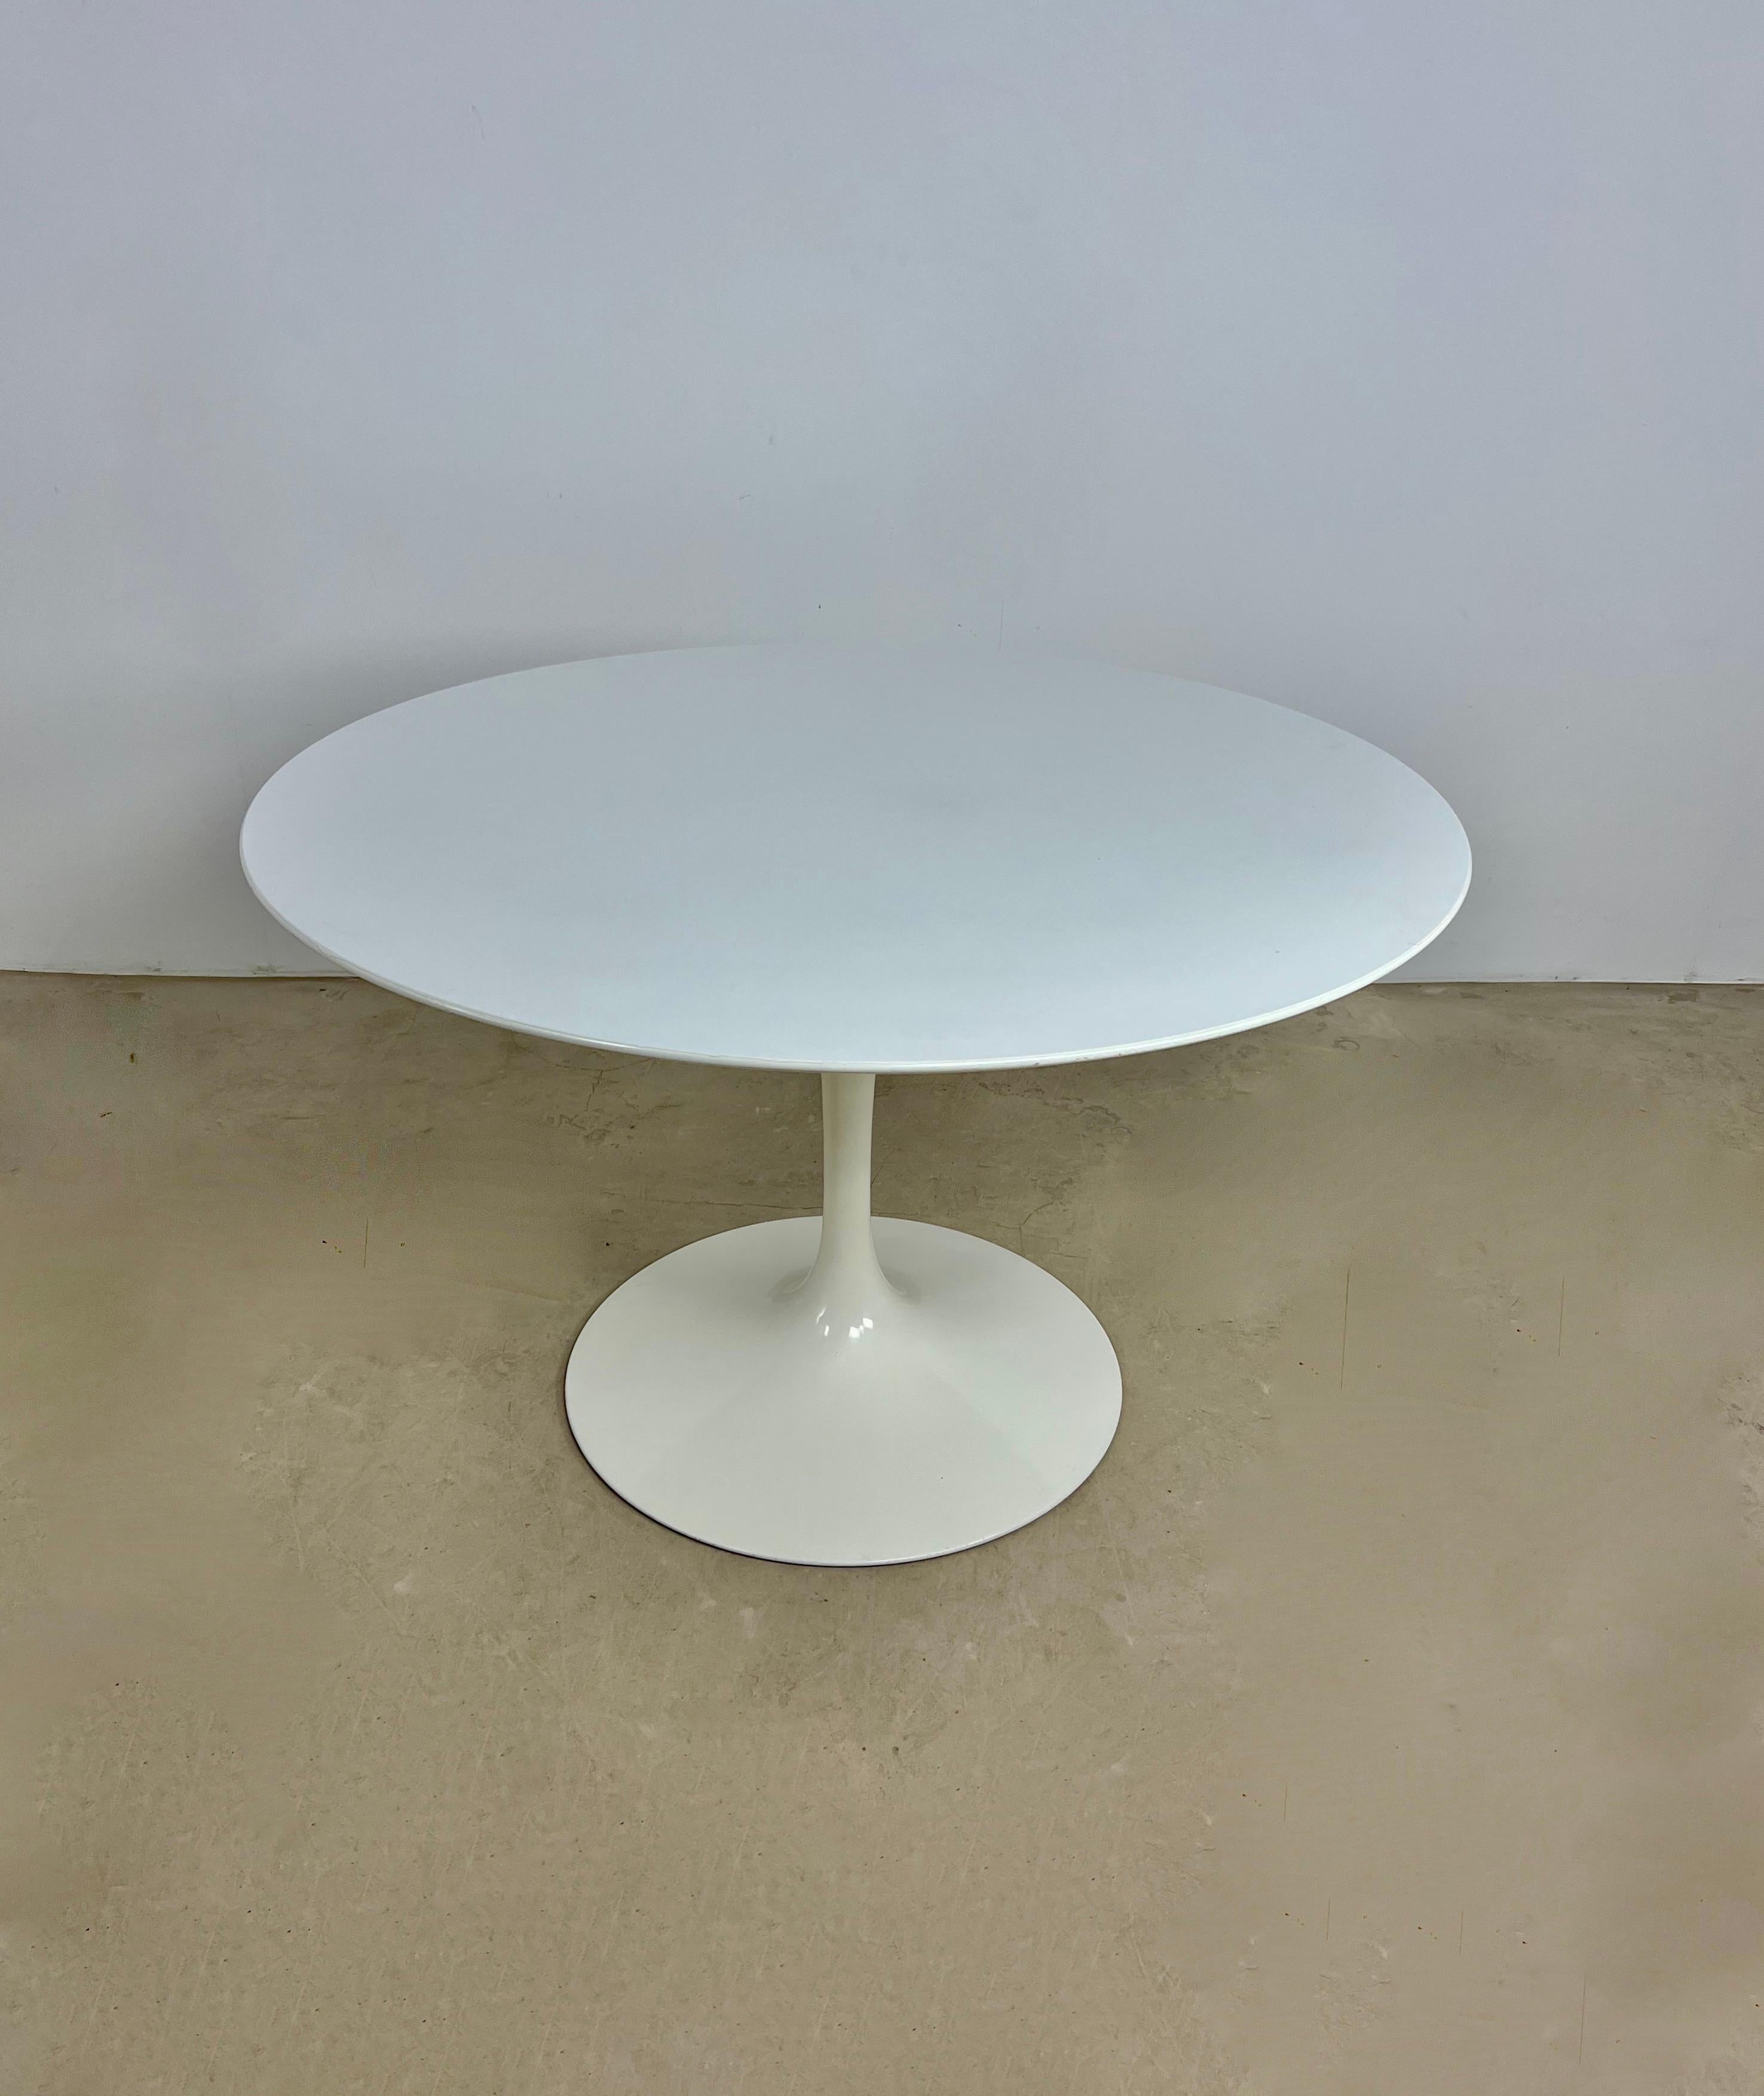 White laminated wood table. Stamped Knoll international. Wear due to time and age of the table.